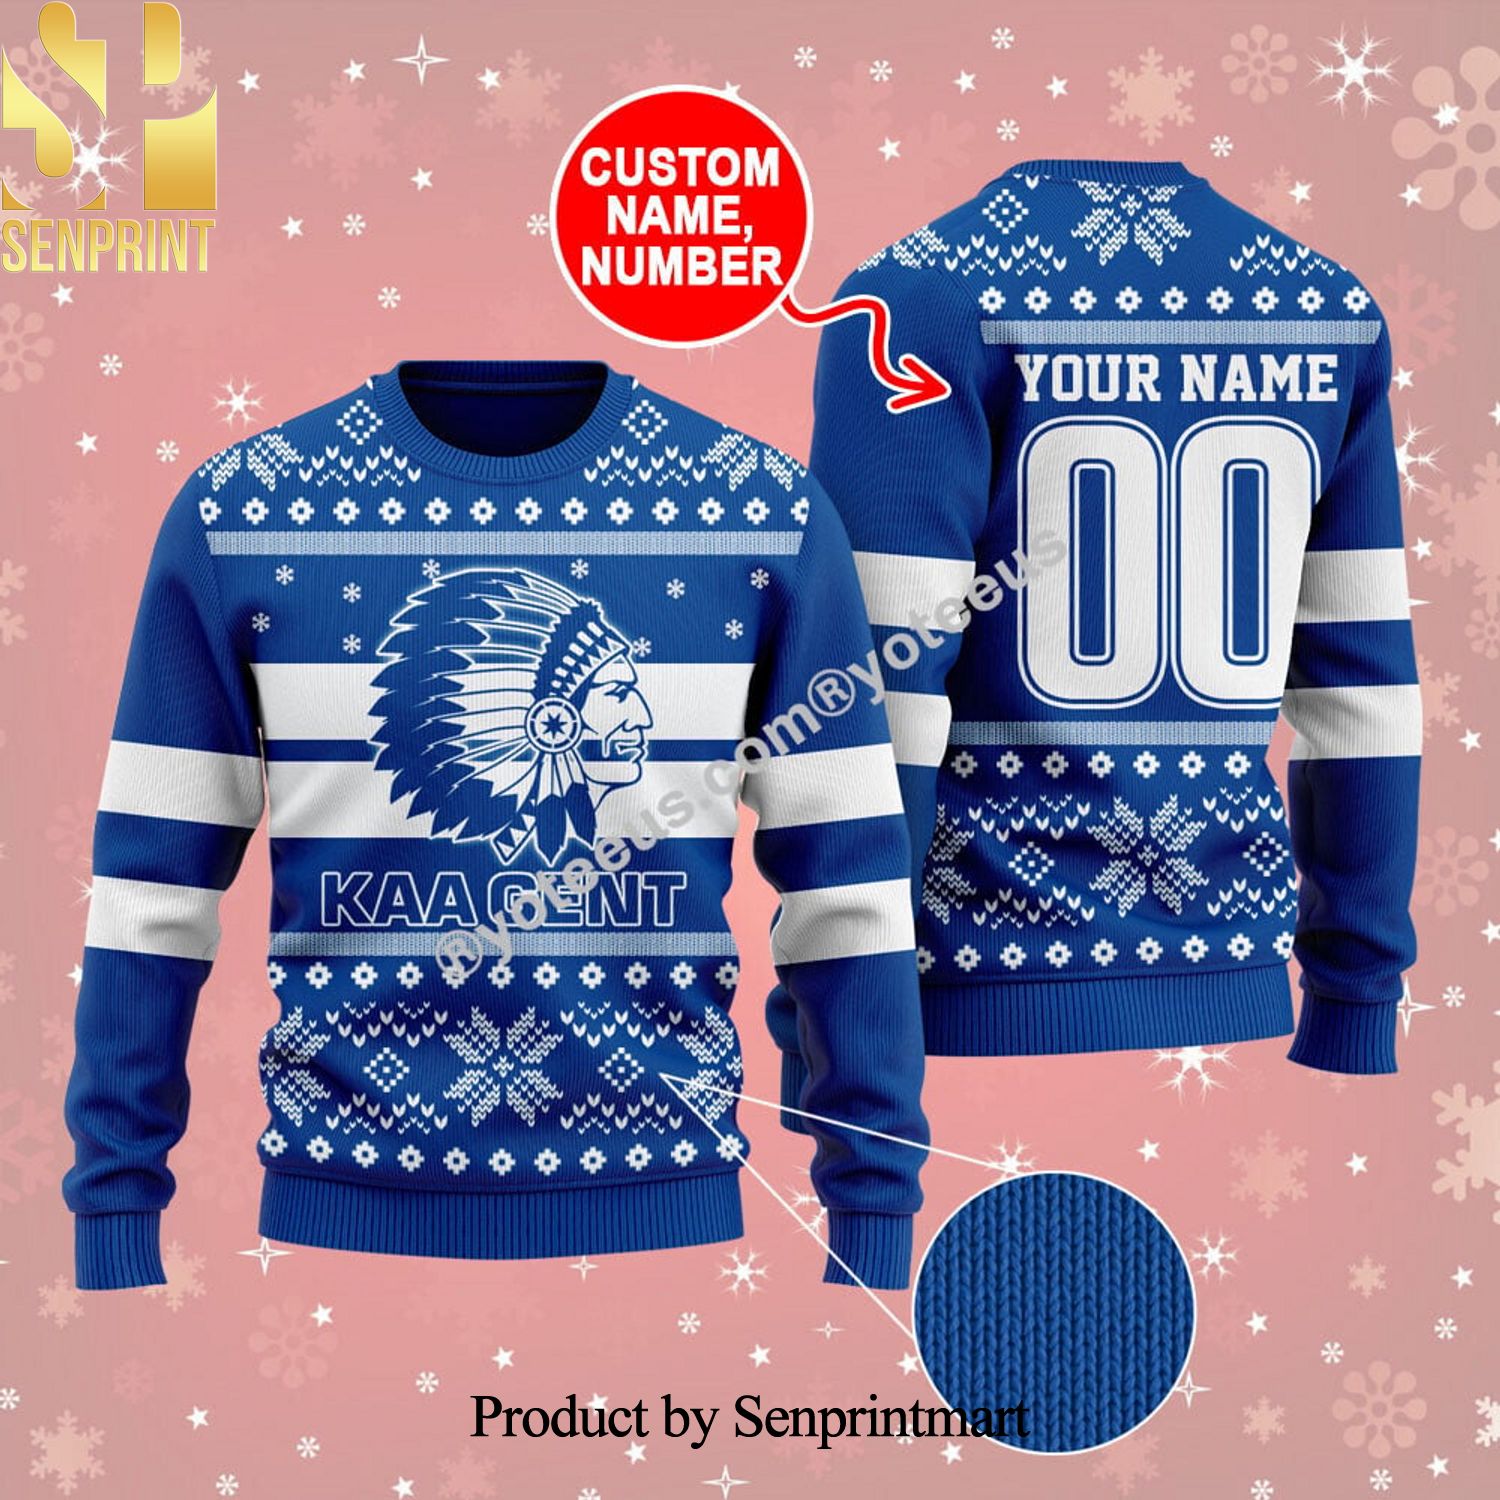 KAA Gent Ugly Christmas Wool Knitted Sweater